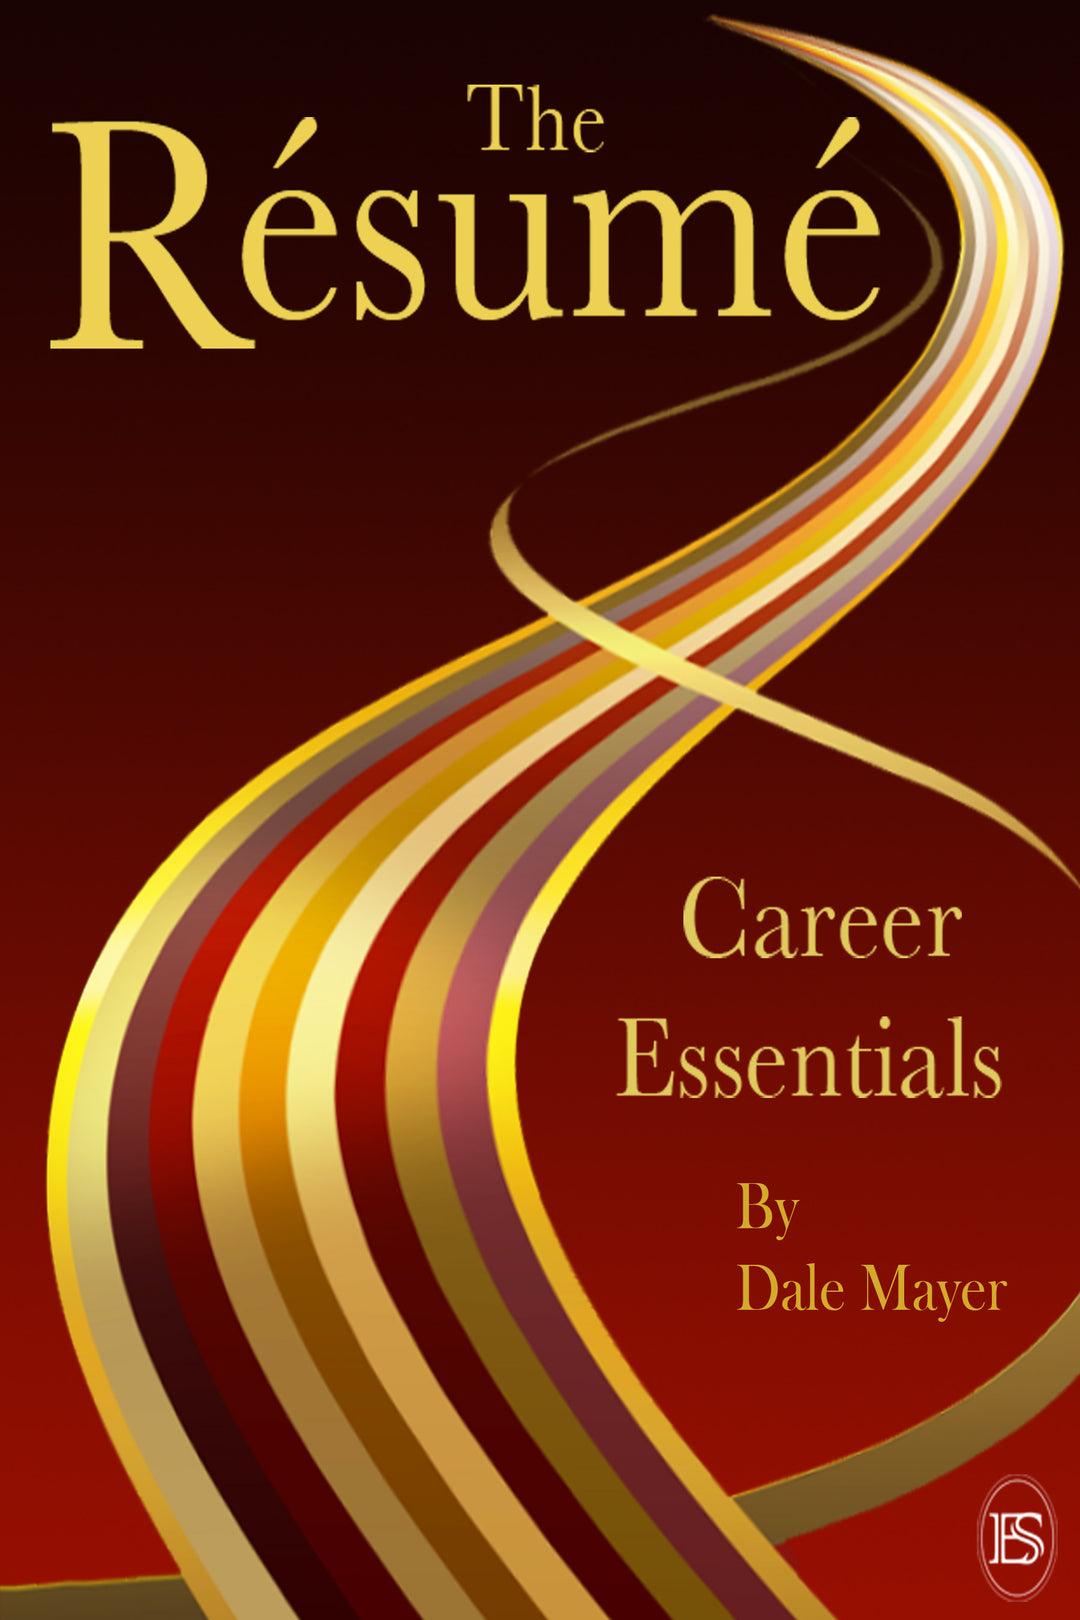 The Resume: Career Essentials Book 1 by Dale Mayer